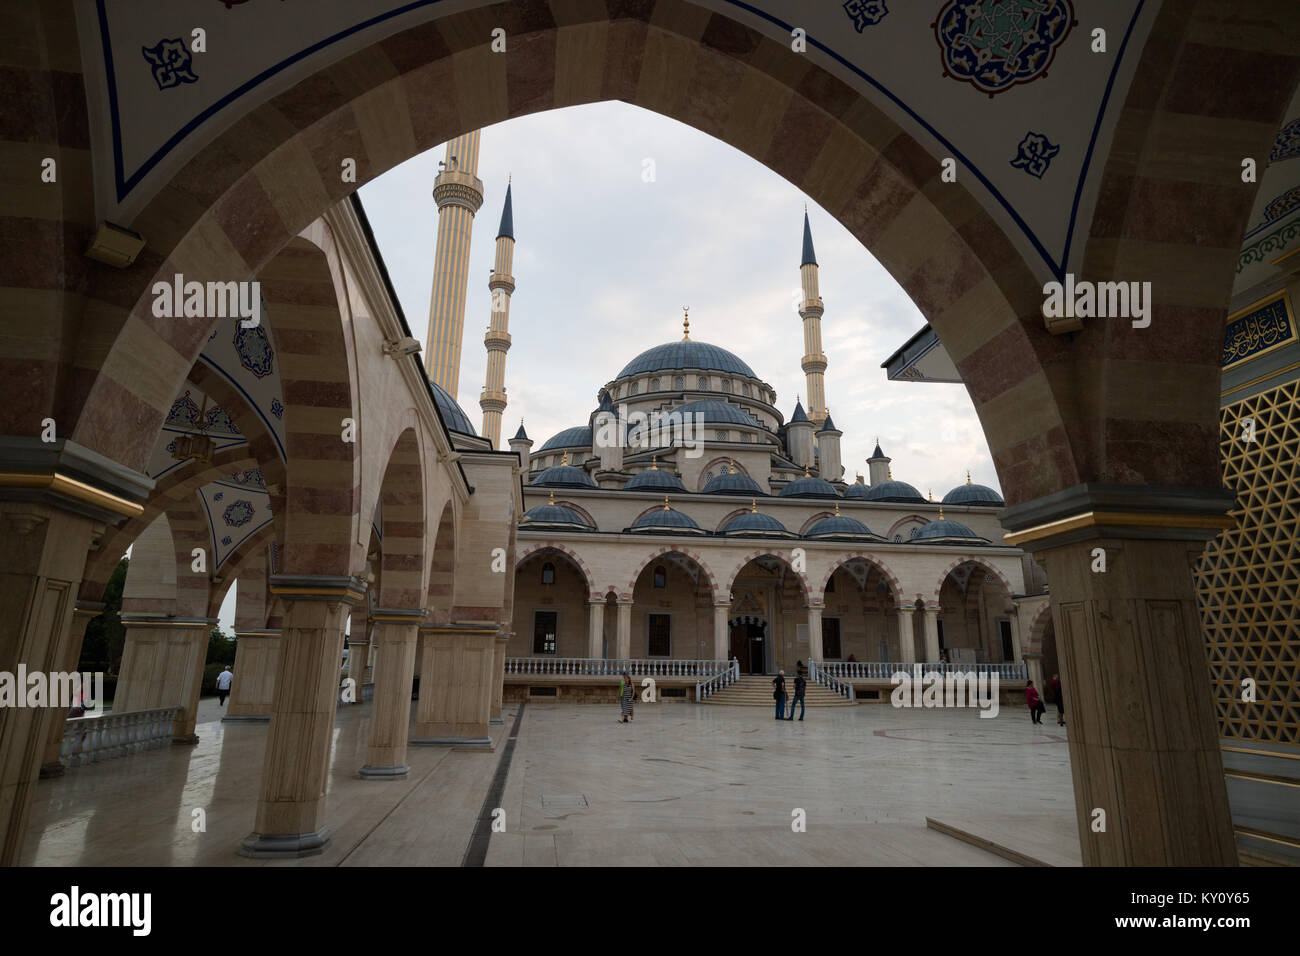 'The Heart of Chechnya' Mosque, arches and architectural elements Stock Photo